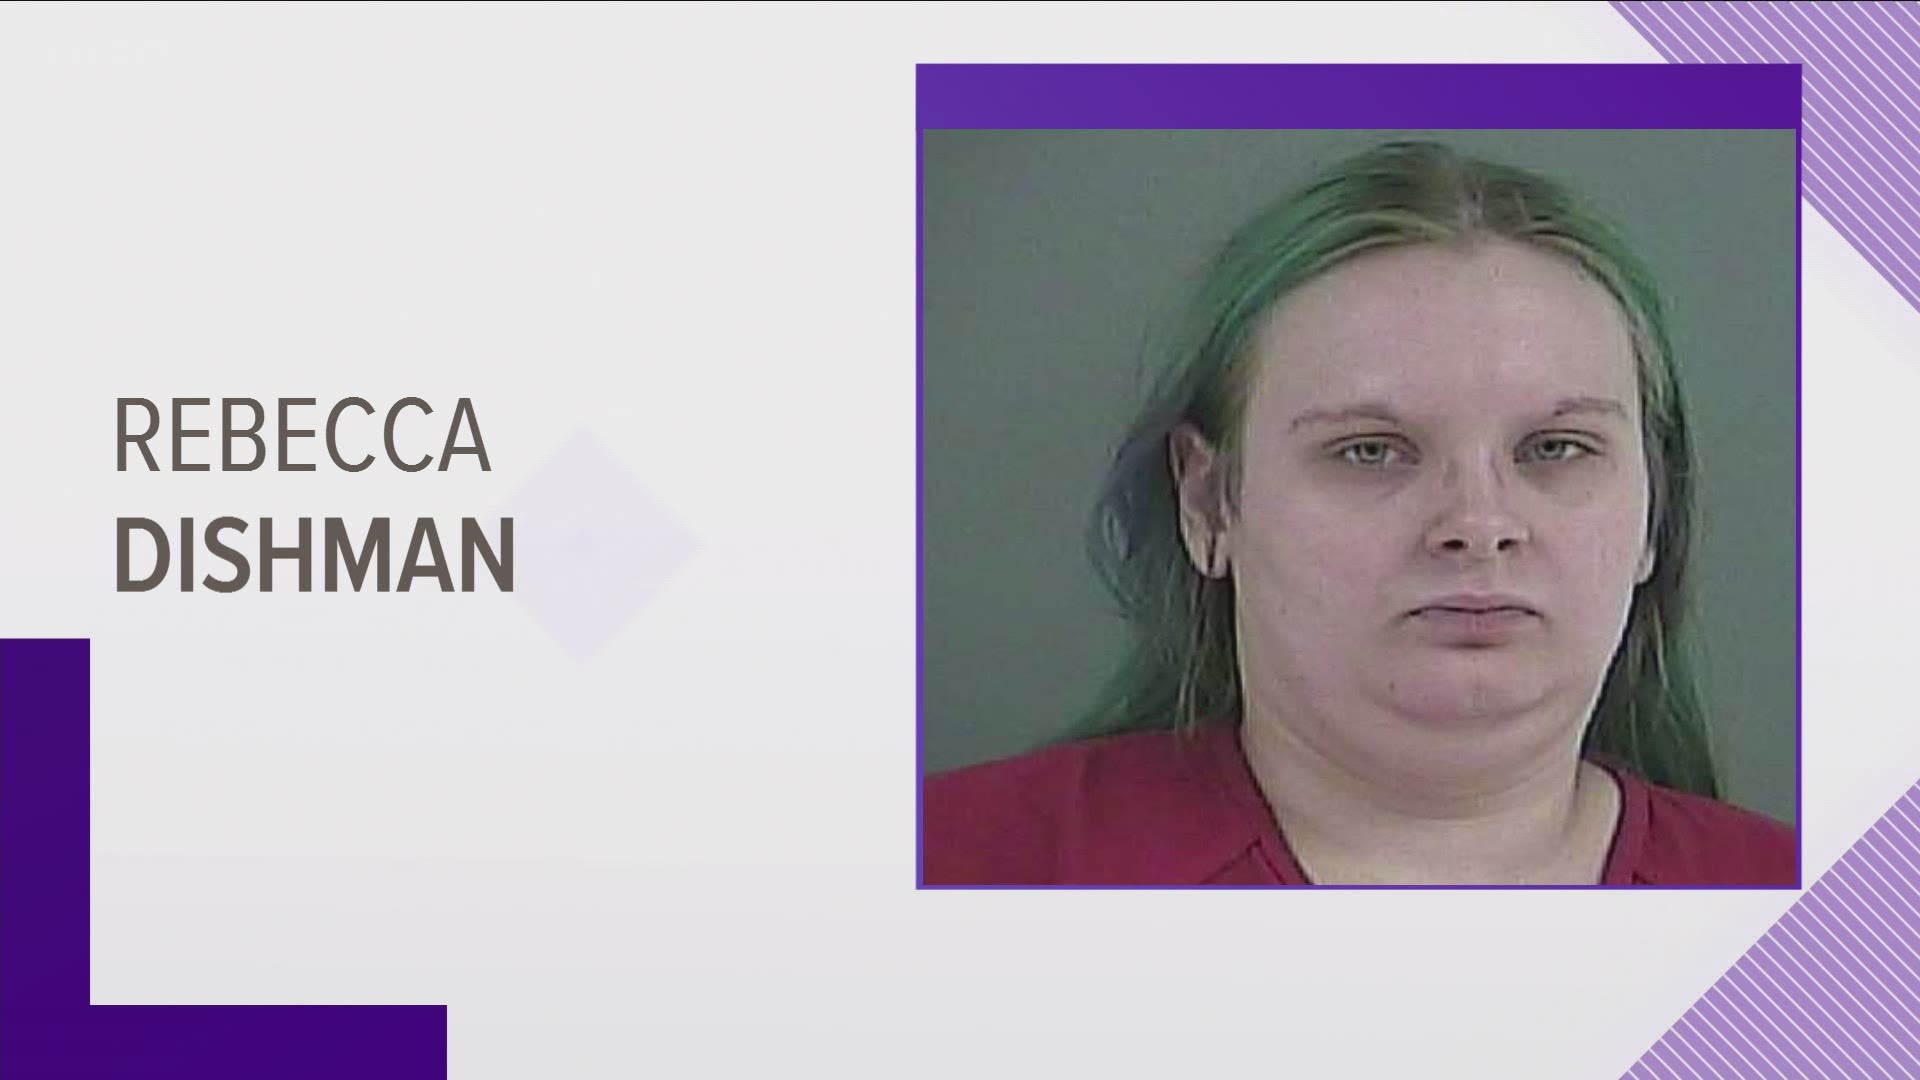 An Anderson County judge ordered a mental evaluation for Rebecca Dishman, who is accused of luring a woman into a home, torturing her, and killing her.